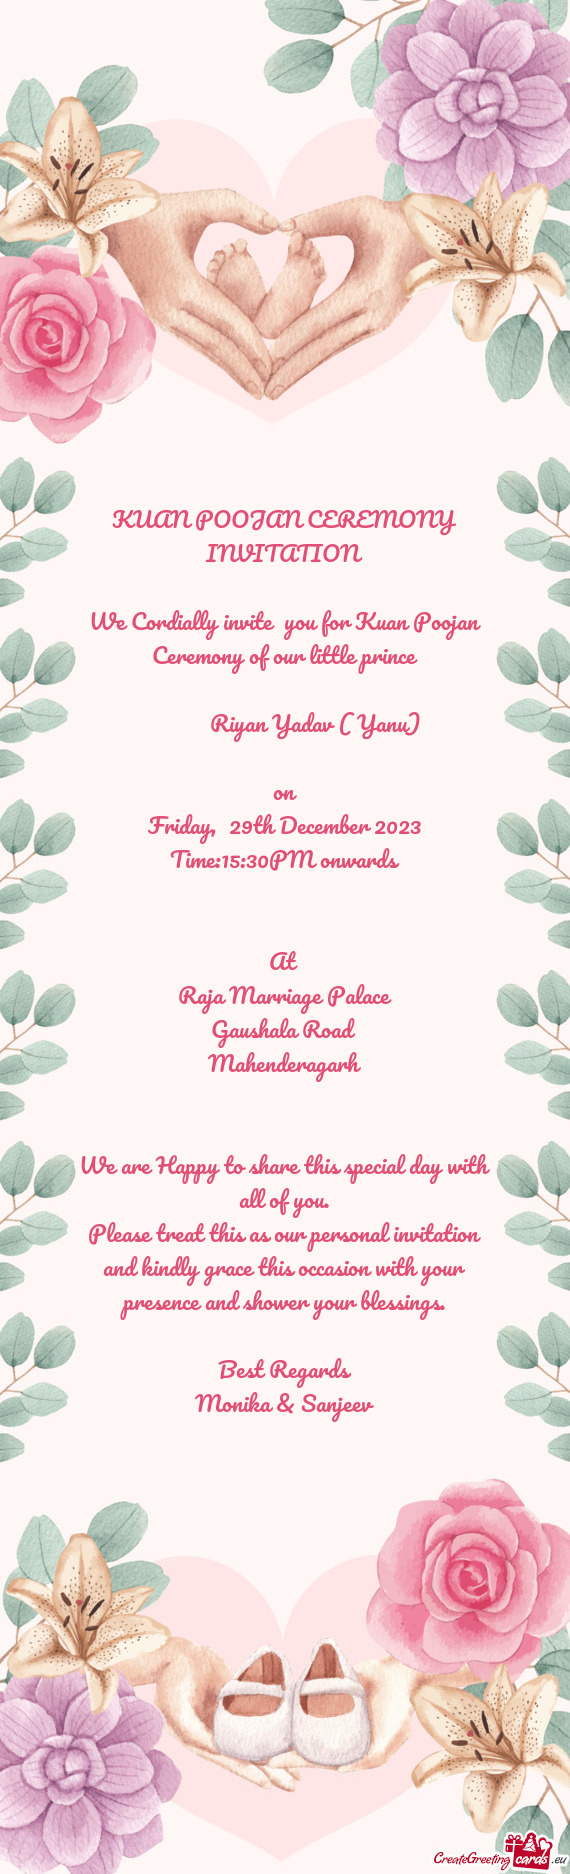 We Cordially invite you for Kuan Poojan Ceremony of our little prince